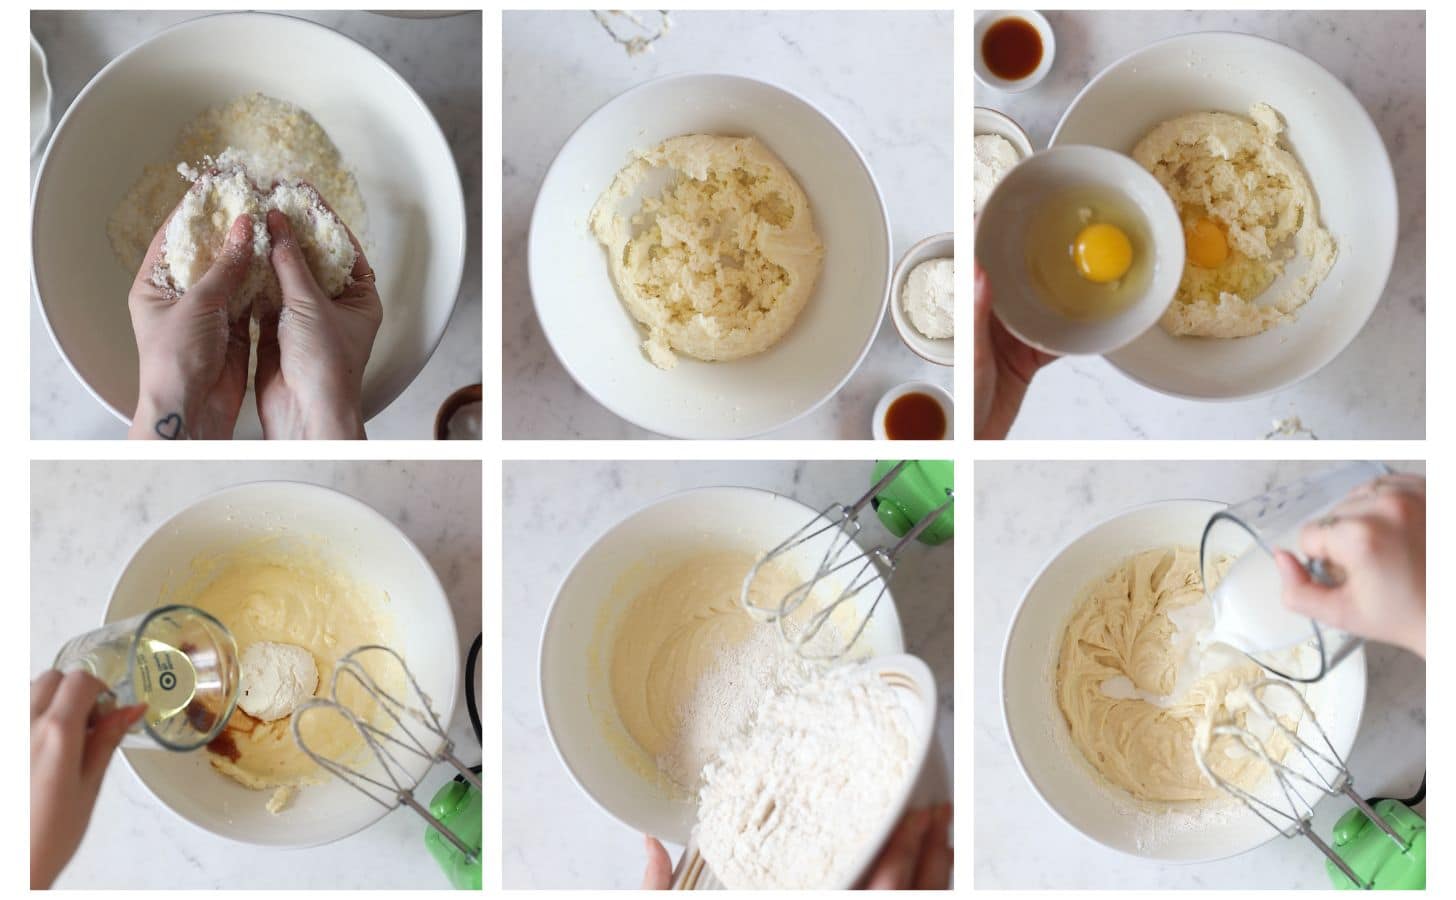 Six images making lemon ricotta layer cake; in image 1, two hands rub sugar and lemon zest in a white bowl on a marble counter. In image 2, the white bowl has creamed butter and sugar. In image 3, a hand pours eggs into the butter and sugar mixture. In image 4, a hand pours oil into the bowl with ricotta and vanilla extract. In photo 5, the hands add flour from a white bowl to the batter. In photo 6, a hand pours milk into the batter.